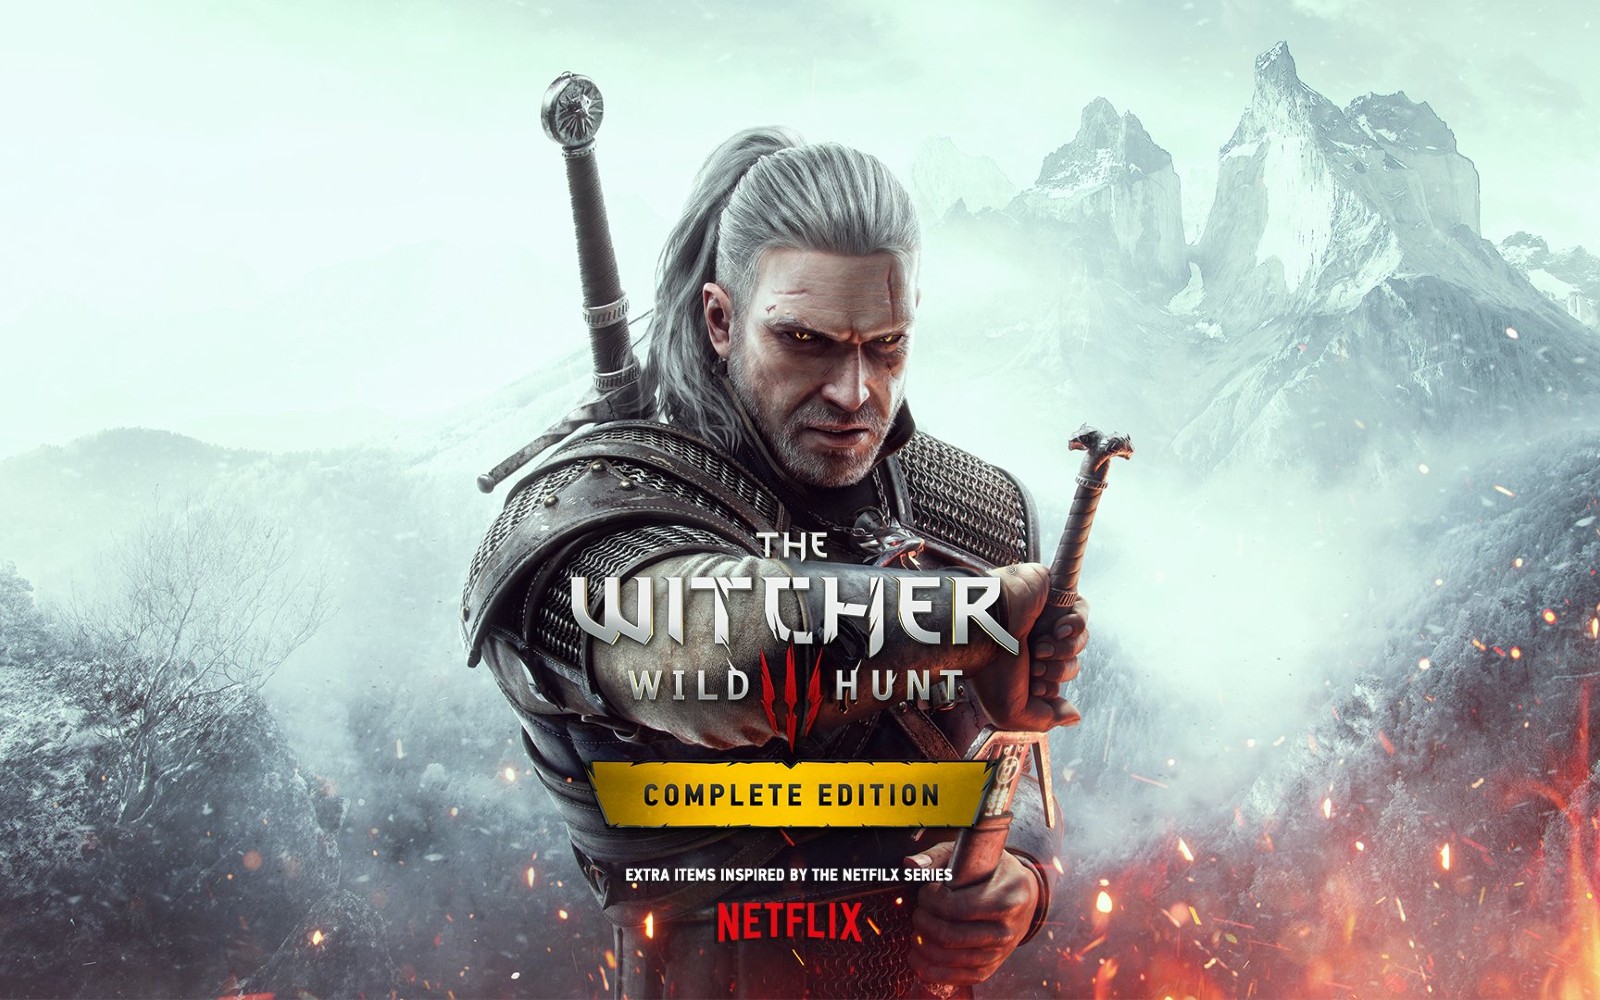 ‘The Witcher 3: Wild Hunt’ is getting free DLC inspired by the Netflix sequence